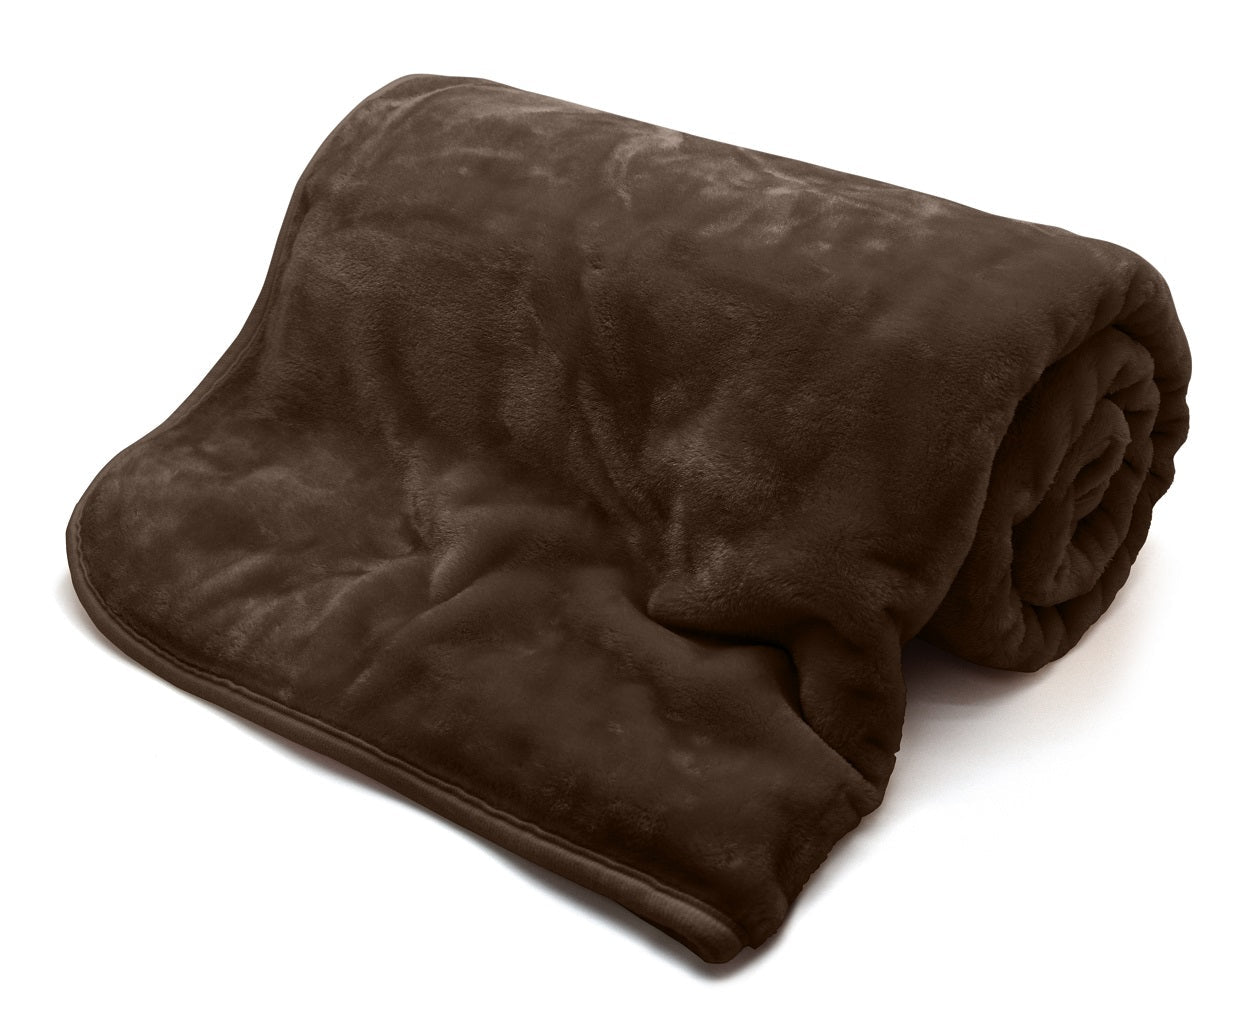 Mink Throws Blanket For Couch - TheComfortshop.co.ukThrows0721718973690thecomfortshopTheComfortshop.co.ukmink-throws-blanket-for-couchChocolateSingleMink Throws Blanket For Couch - TheComfortshop.co.uk